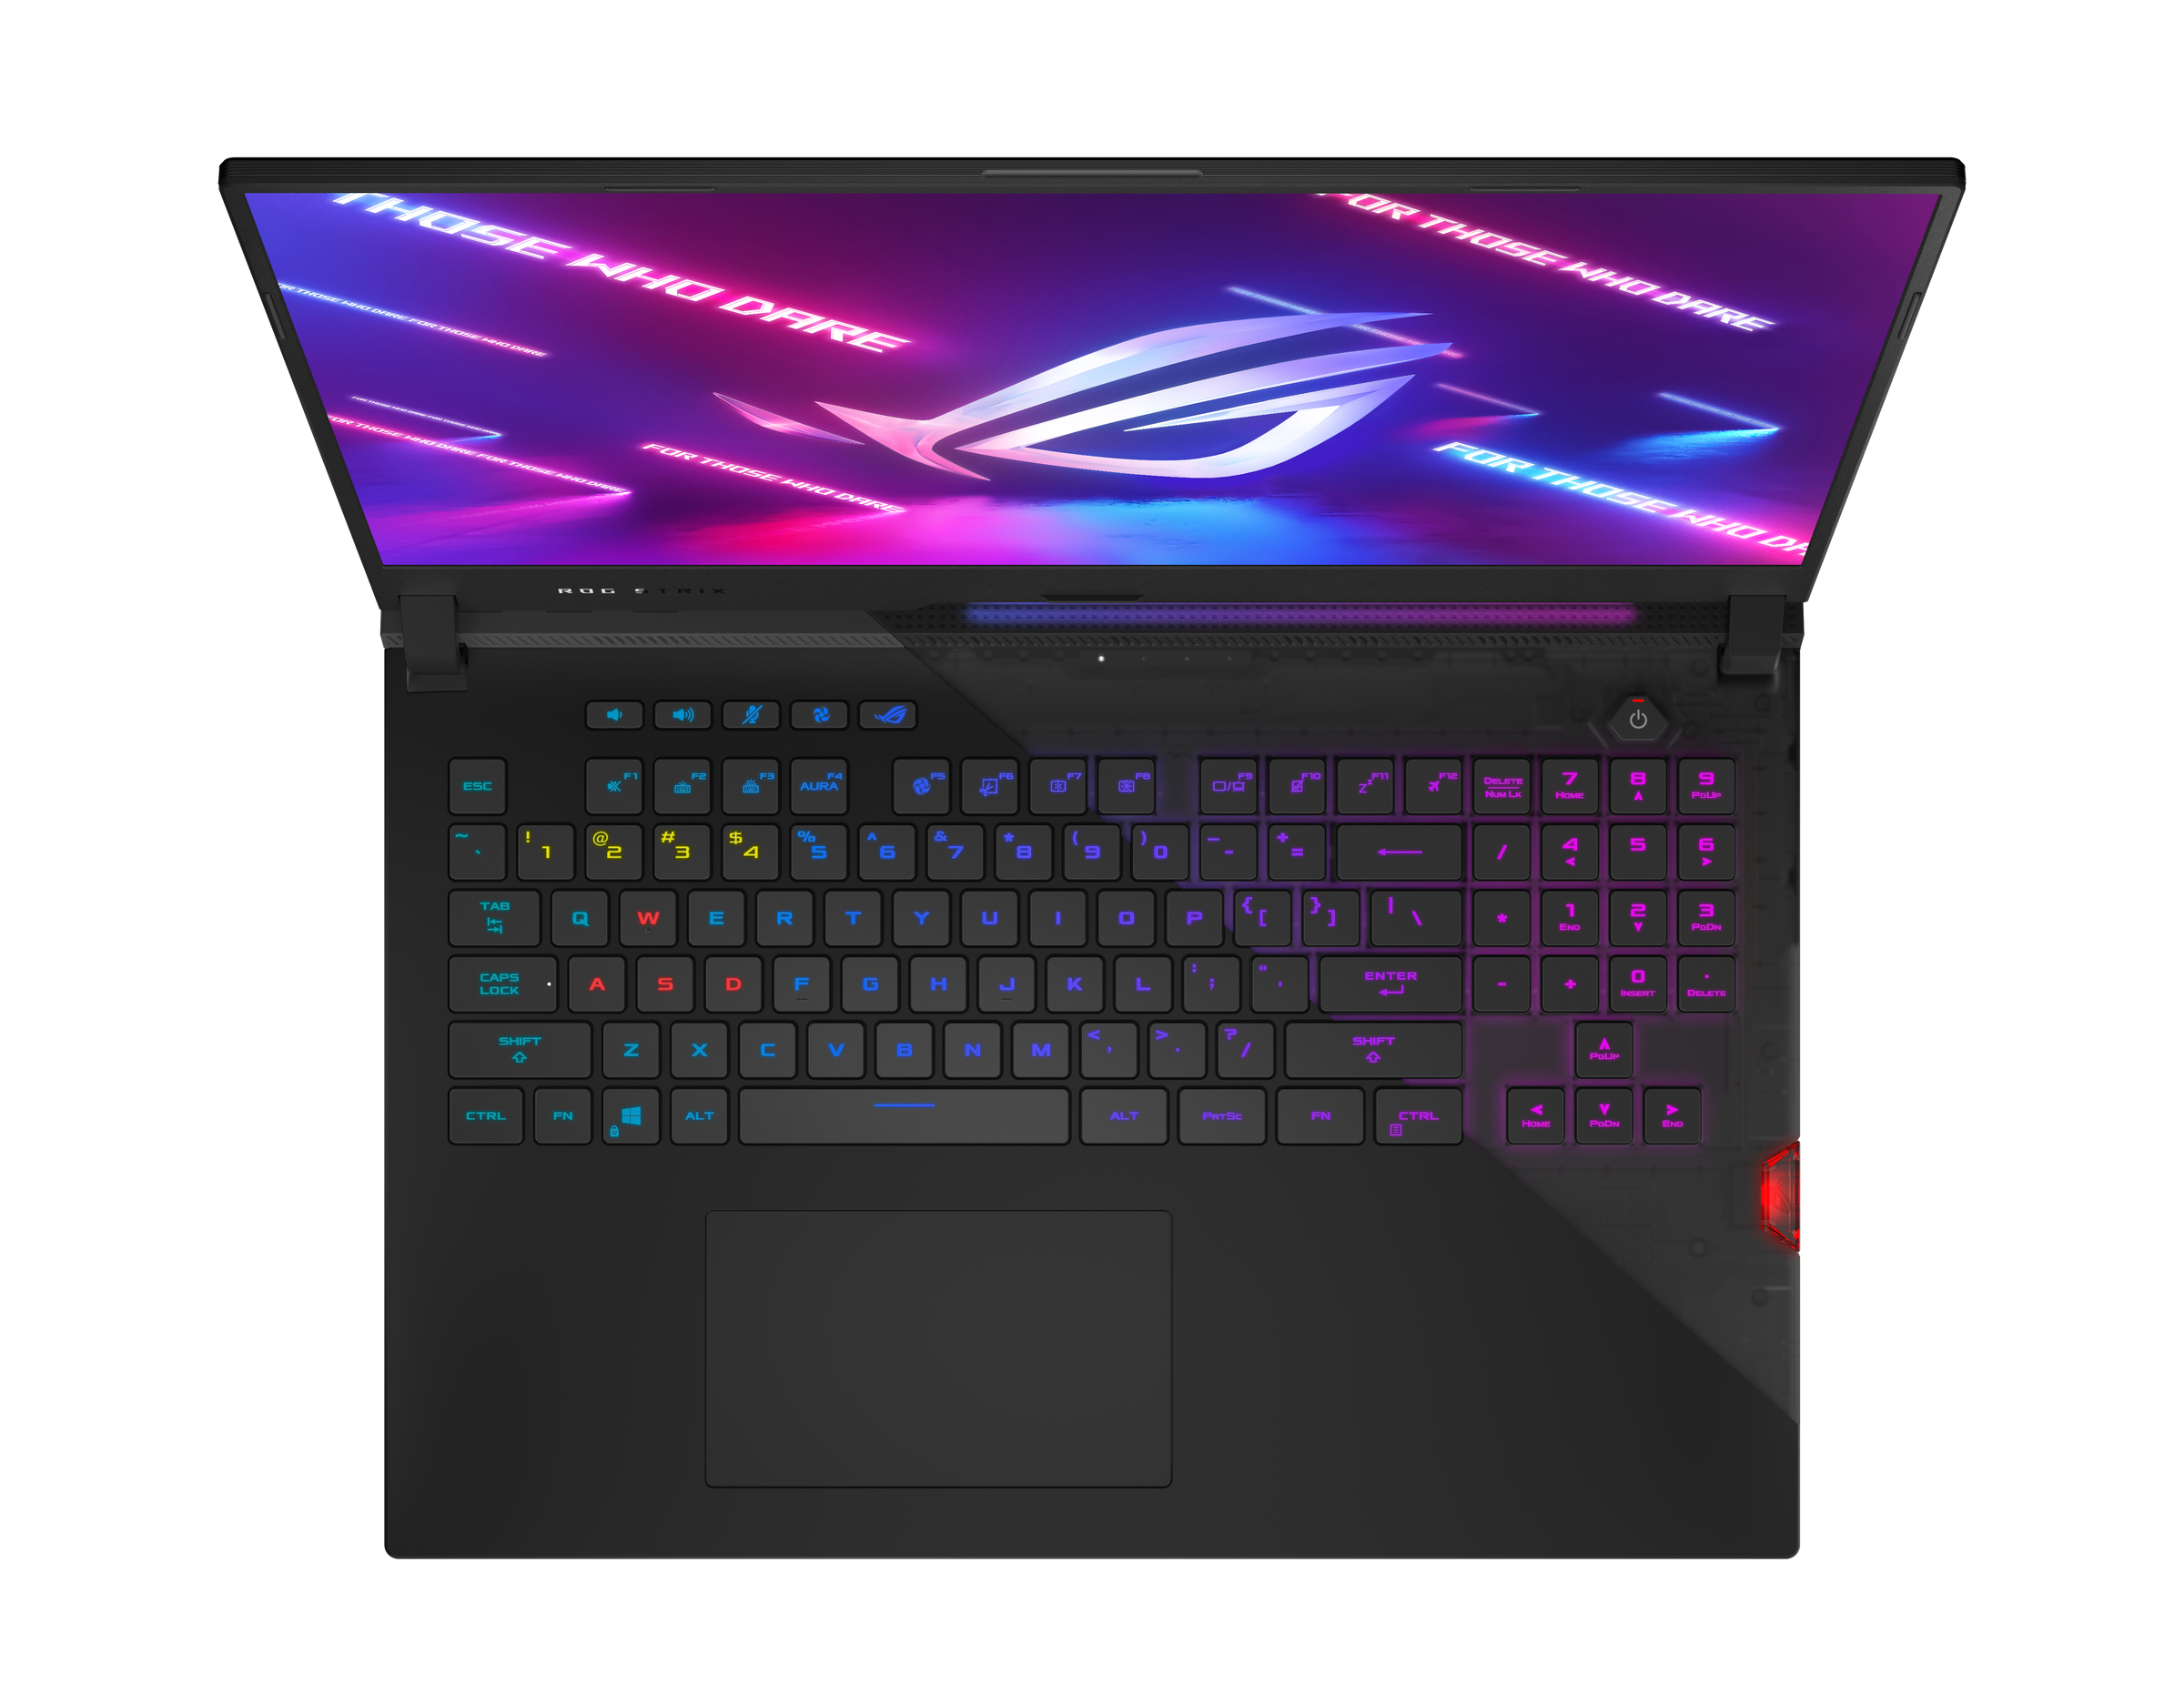 The Asus ROG Strix Scar 17 seen from above with the RGB keybaord illuminated. The screen displays the ROG logo on a purple background.